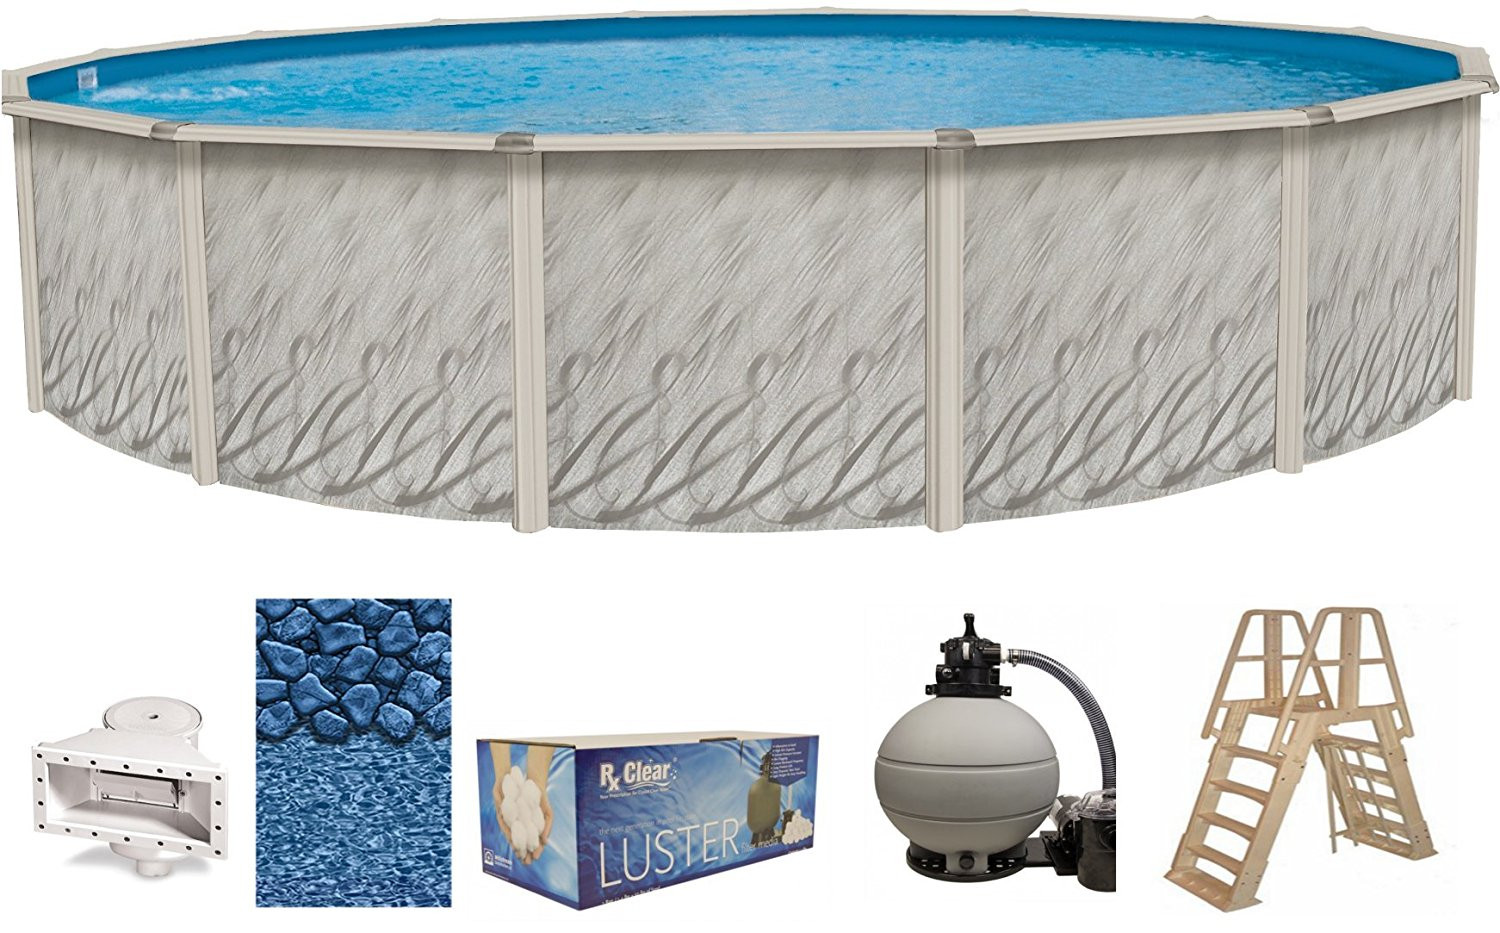 Best Permanent Above Ground Pool
 Top 7 Best Permanent Ground Pool Reviews for 2020